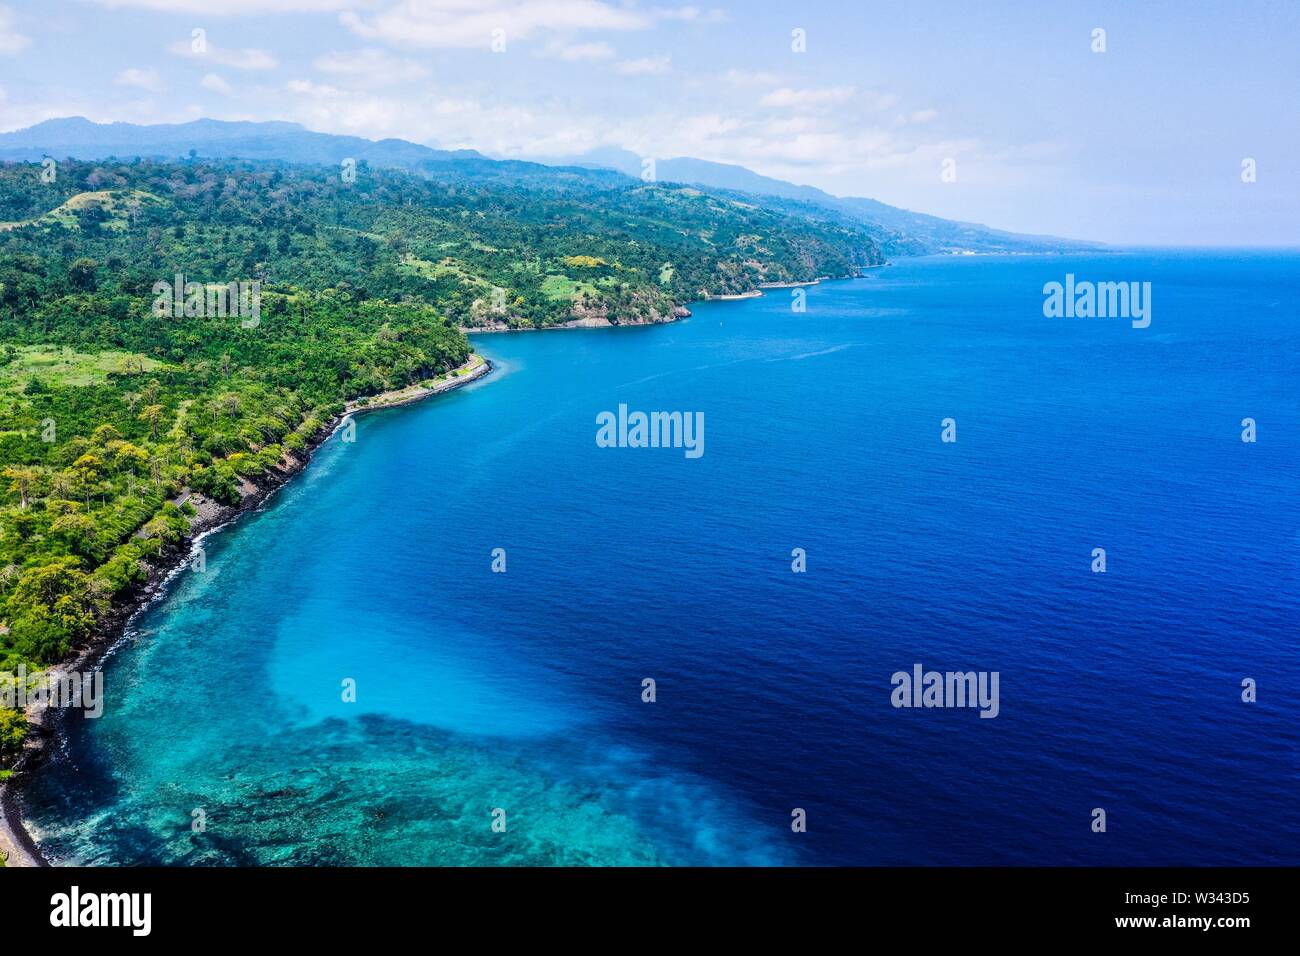 Beautiful Tropical island from above Stock Photo